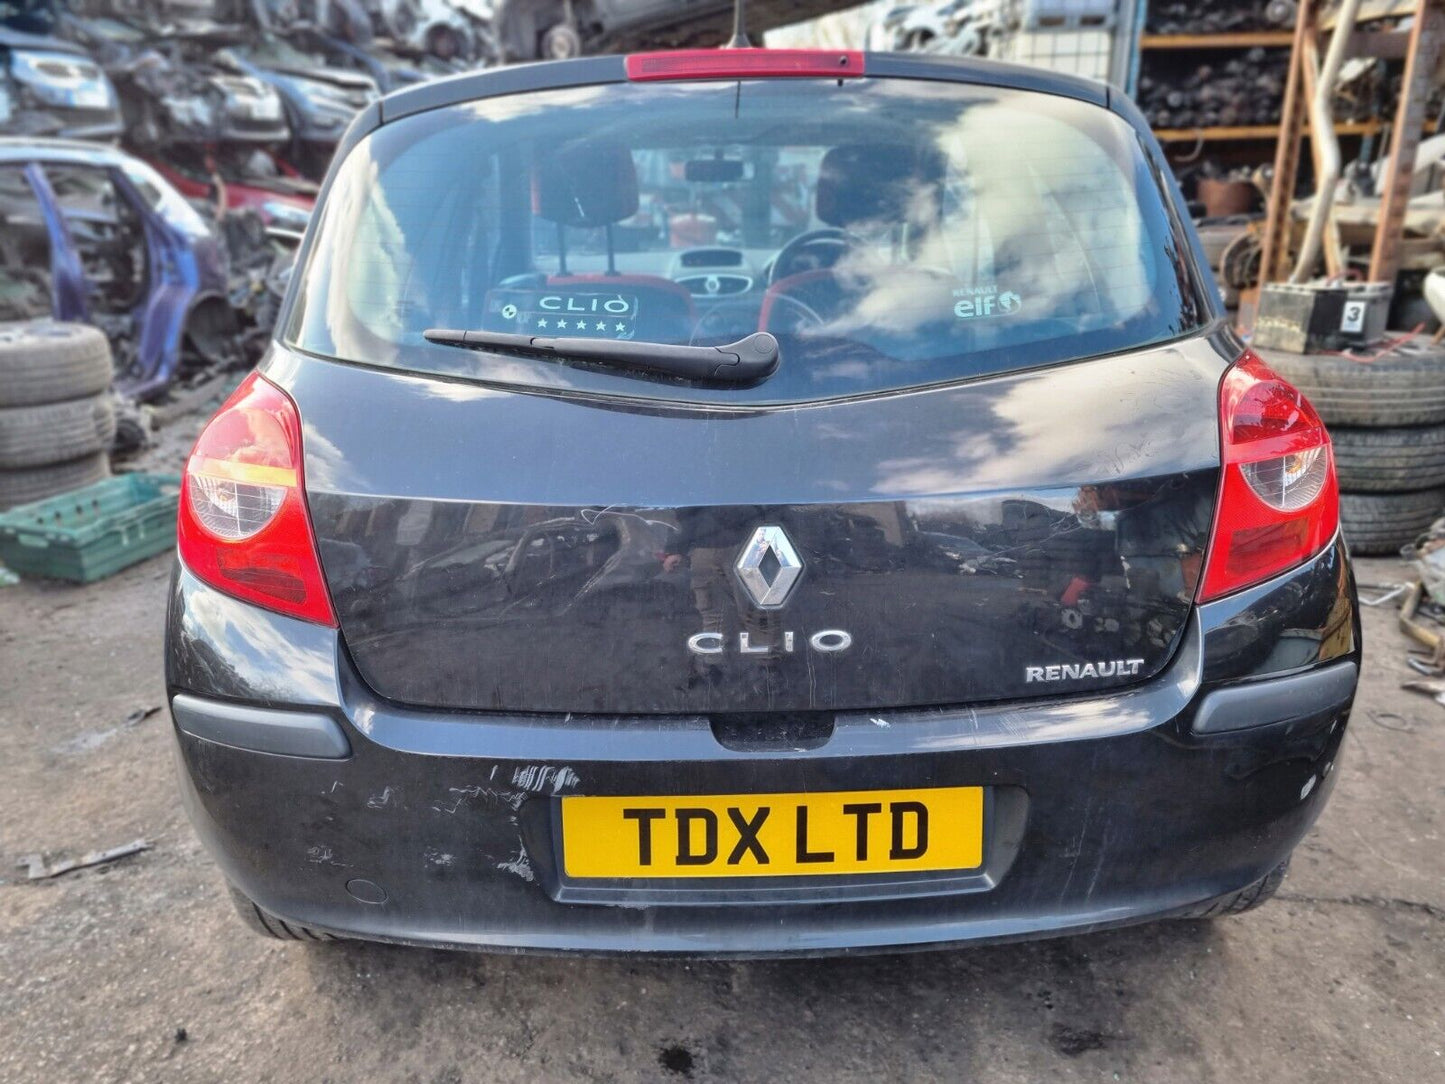 2007 RENAULT CLIO MK3 1.2 PETROL 5 SPEED MANUAL 3DR HATCH VEHICLE FOR BREAKING